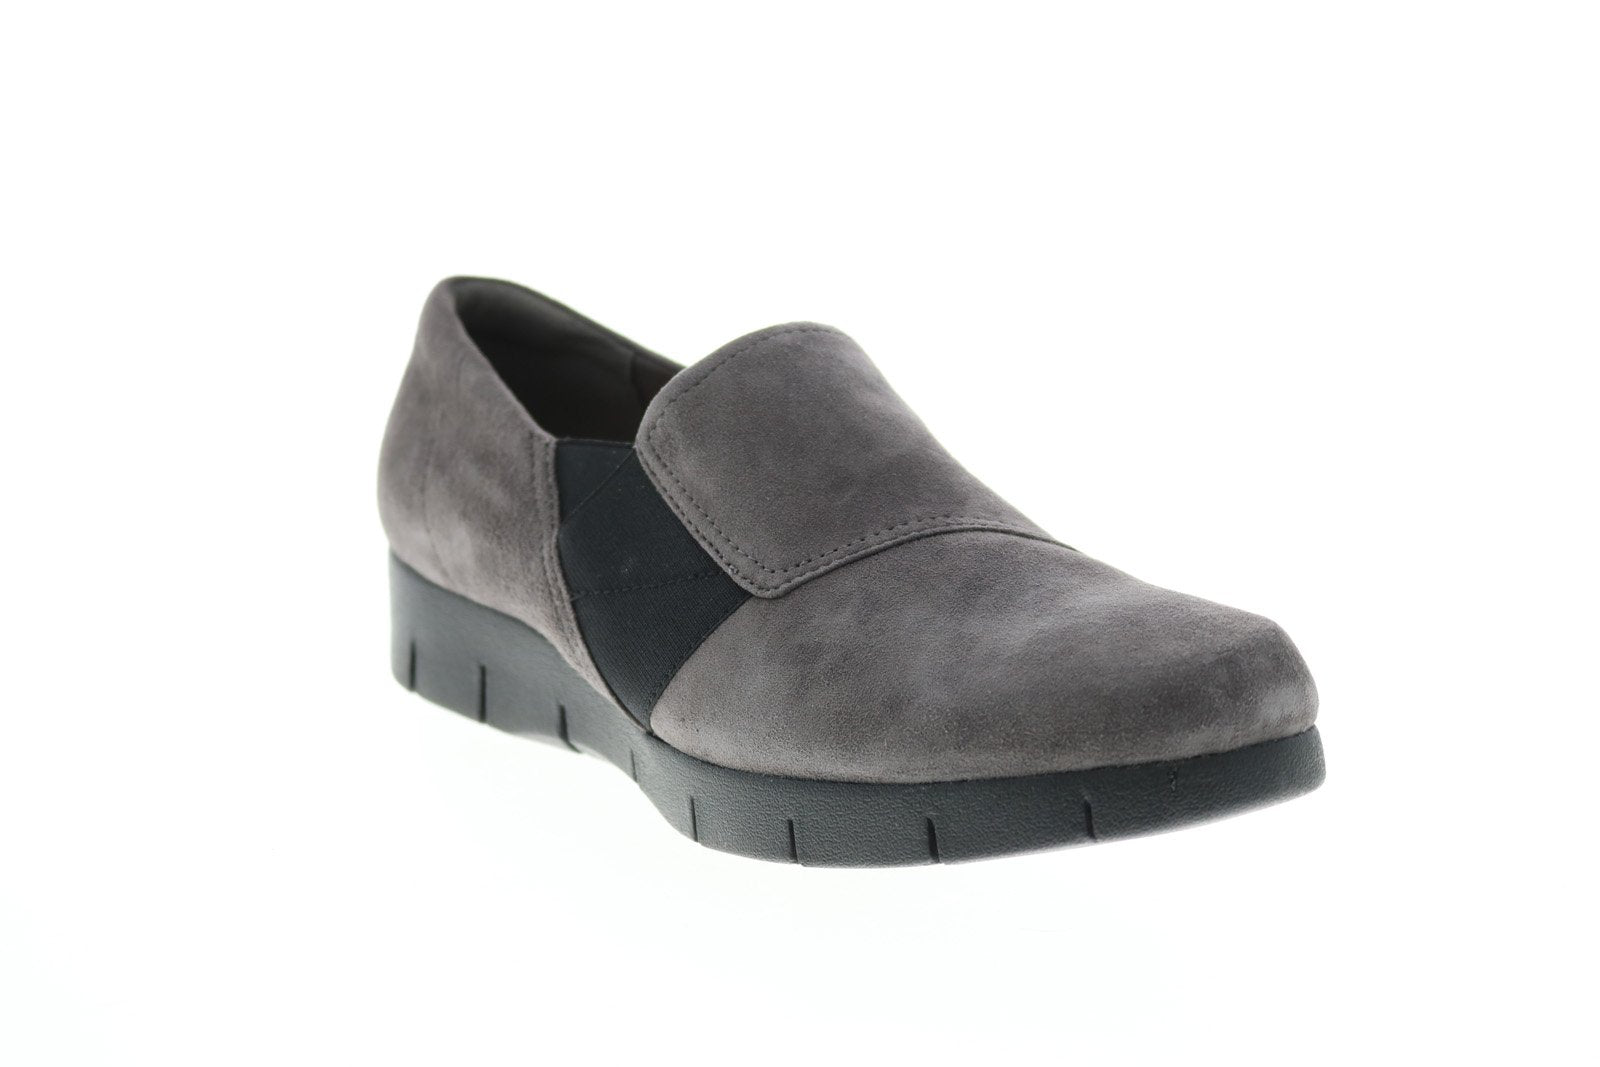 Clarks Daelyn Monarch Womens Gray Suede Slip On Loafer Flats - Ruze Shoes